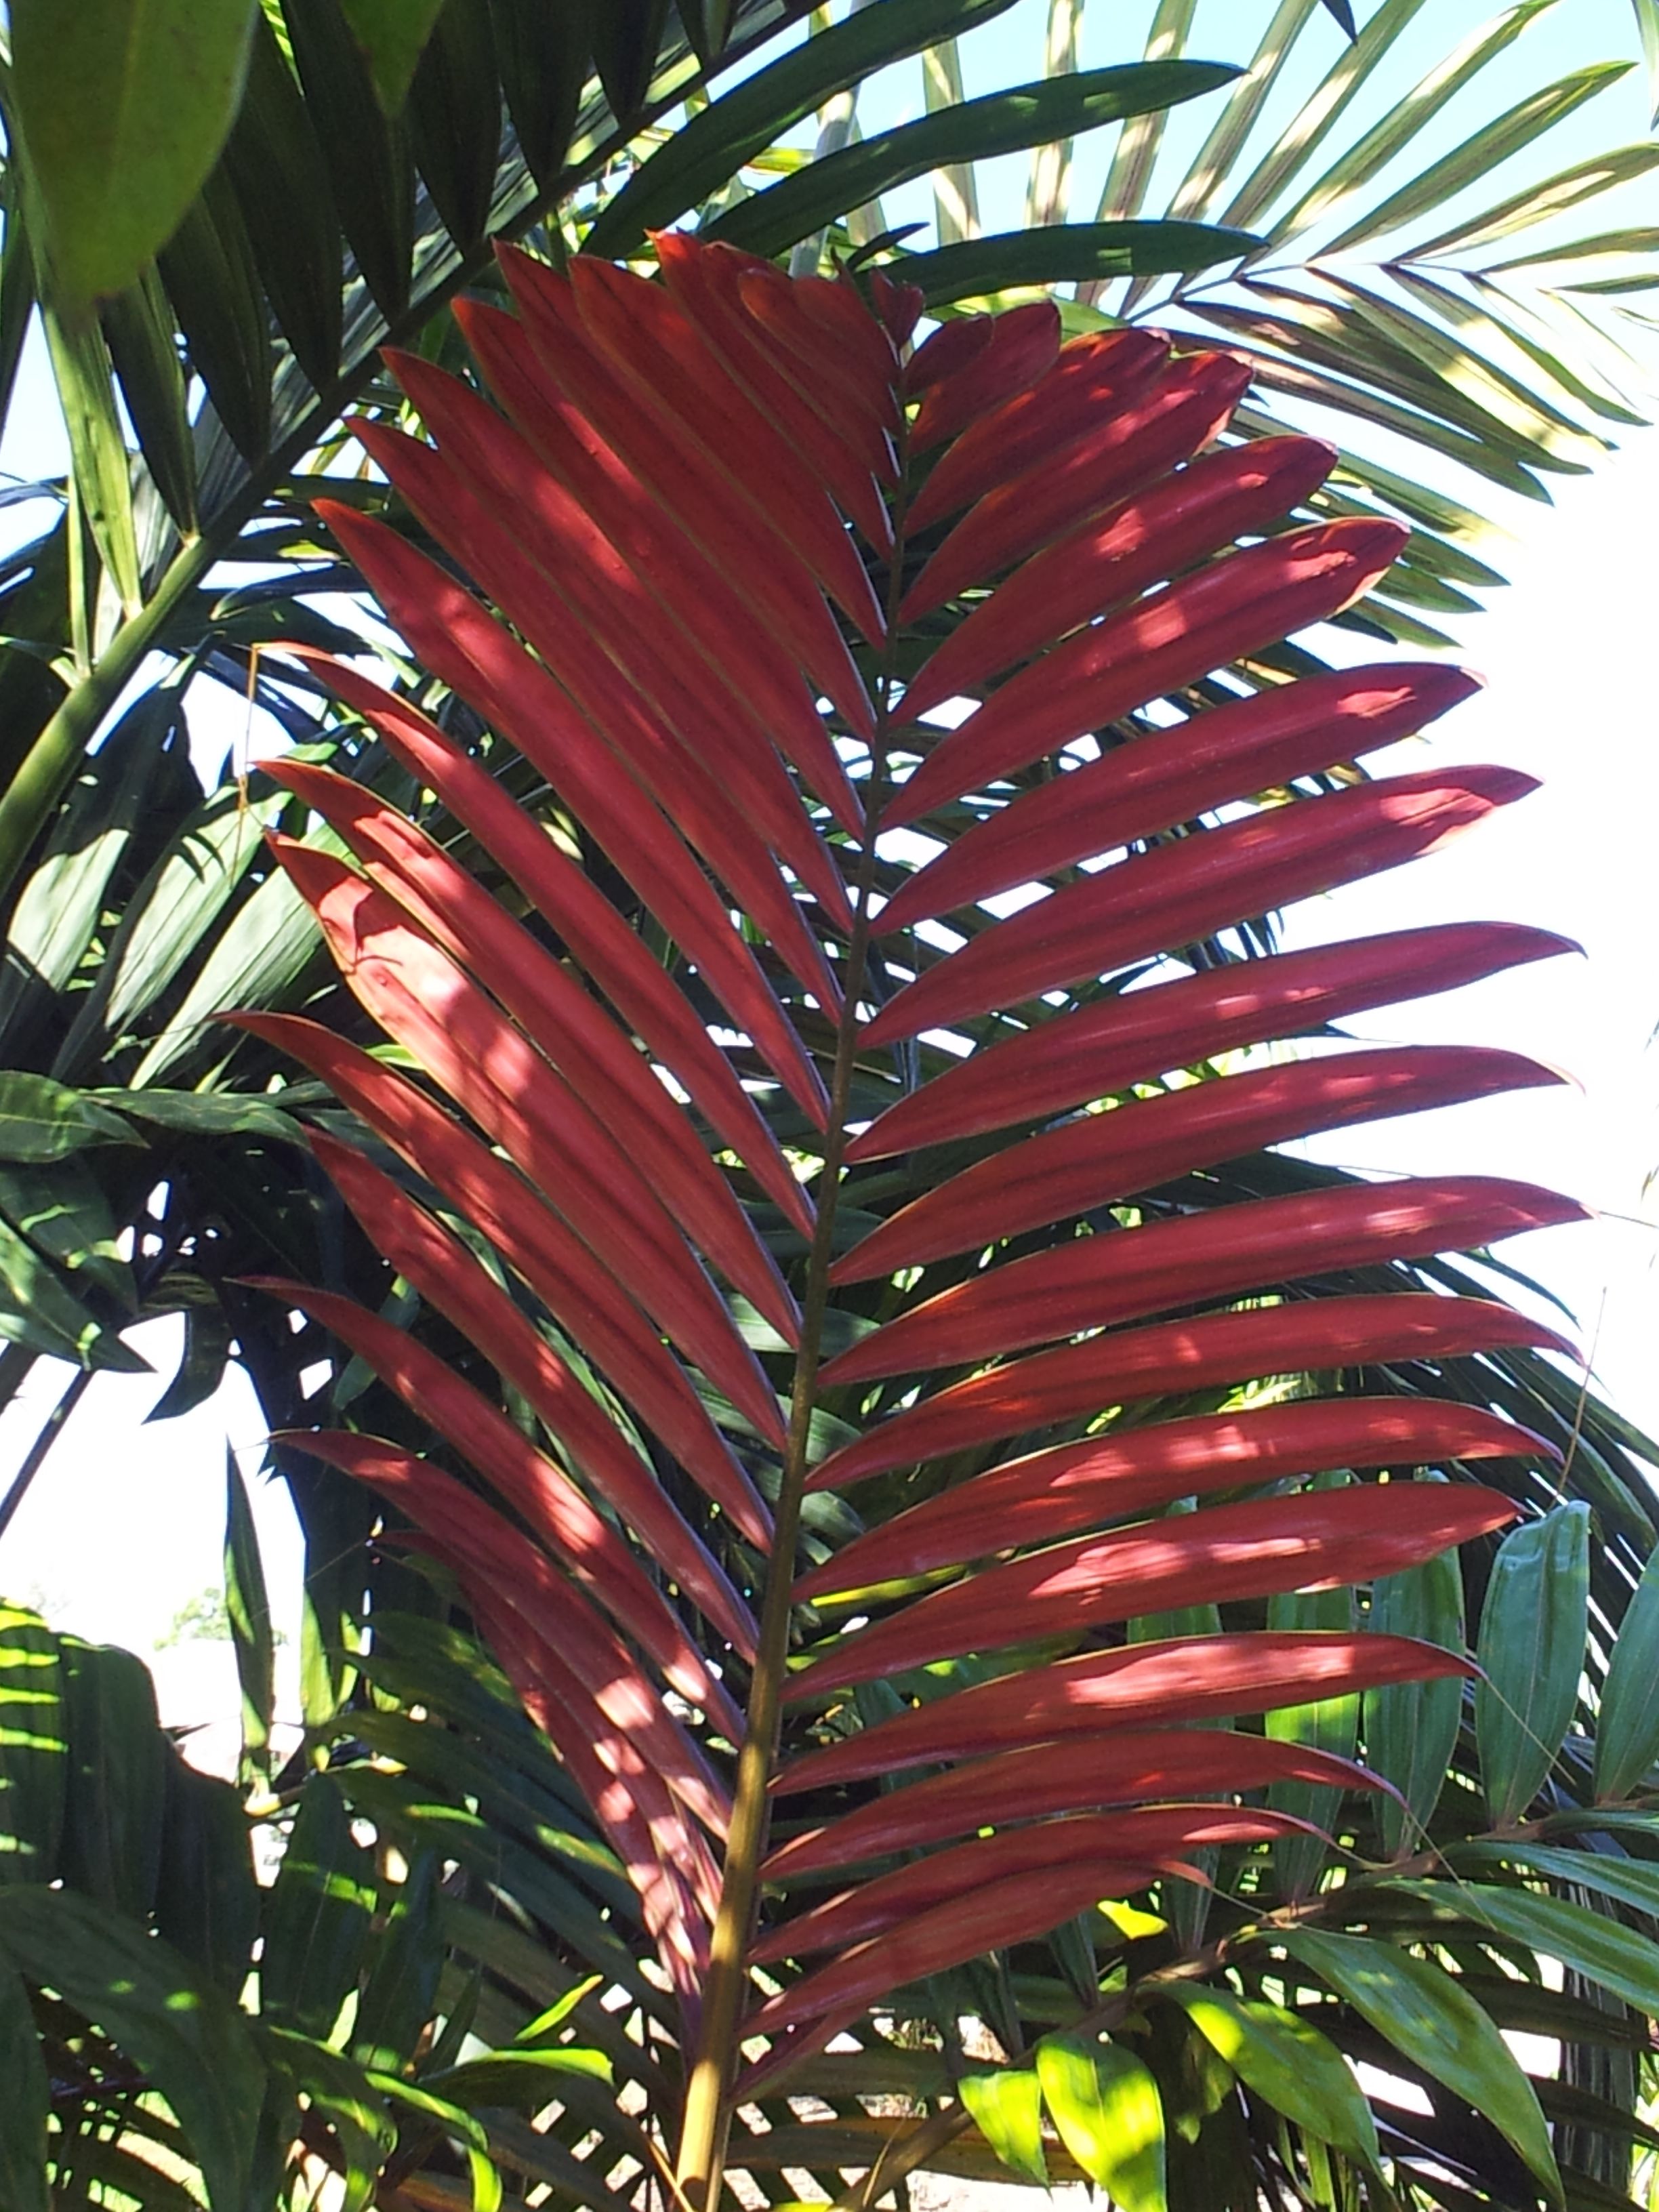 Wekiva Foliage - Red Flame Palm - Live Plant in a 3 Gallon Growers Pot - Chambeyronia Macrocarpa - Extremely Rare Ornamental Palms from Florida